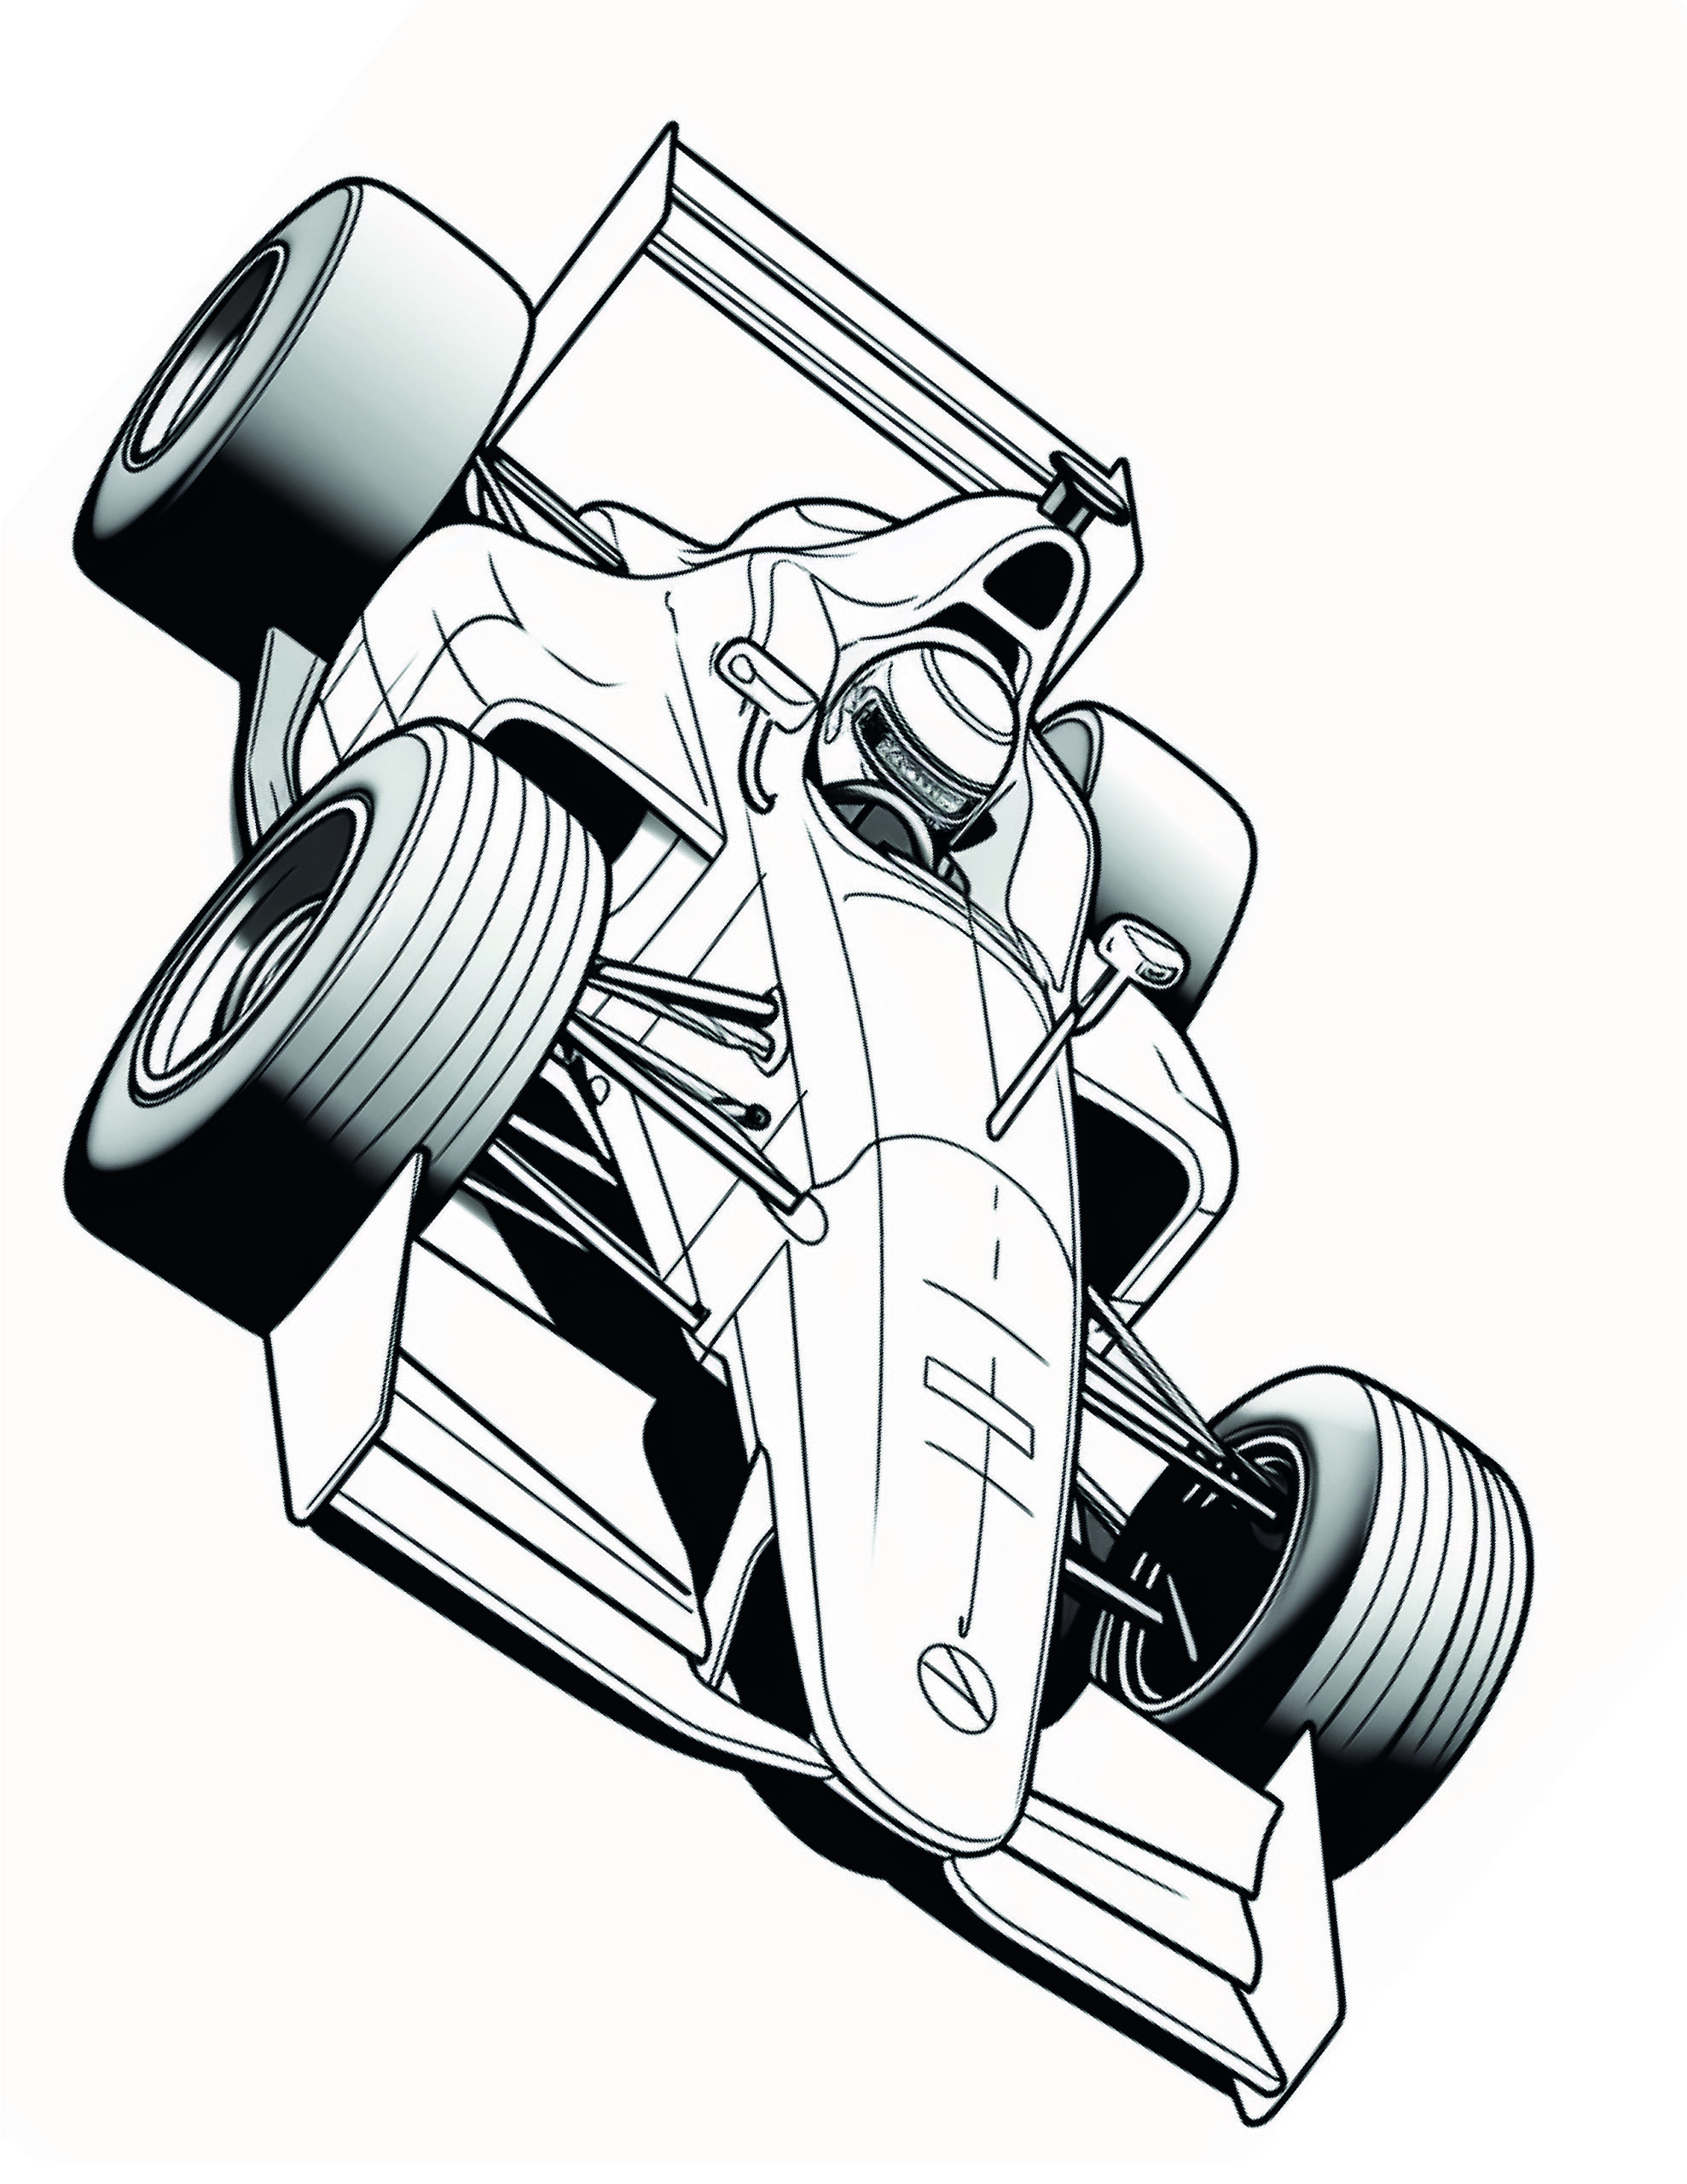 Race Car Coloring Page 6 - A line drawing of a formula one car with an interesting shape.